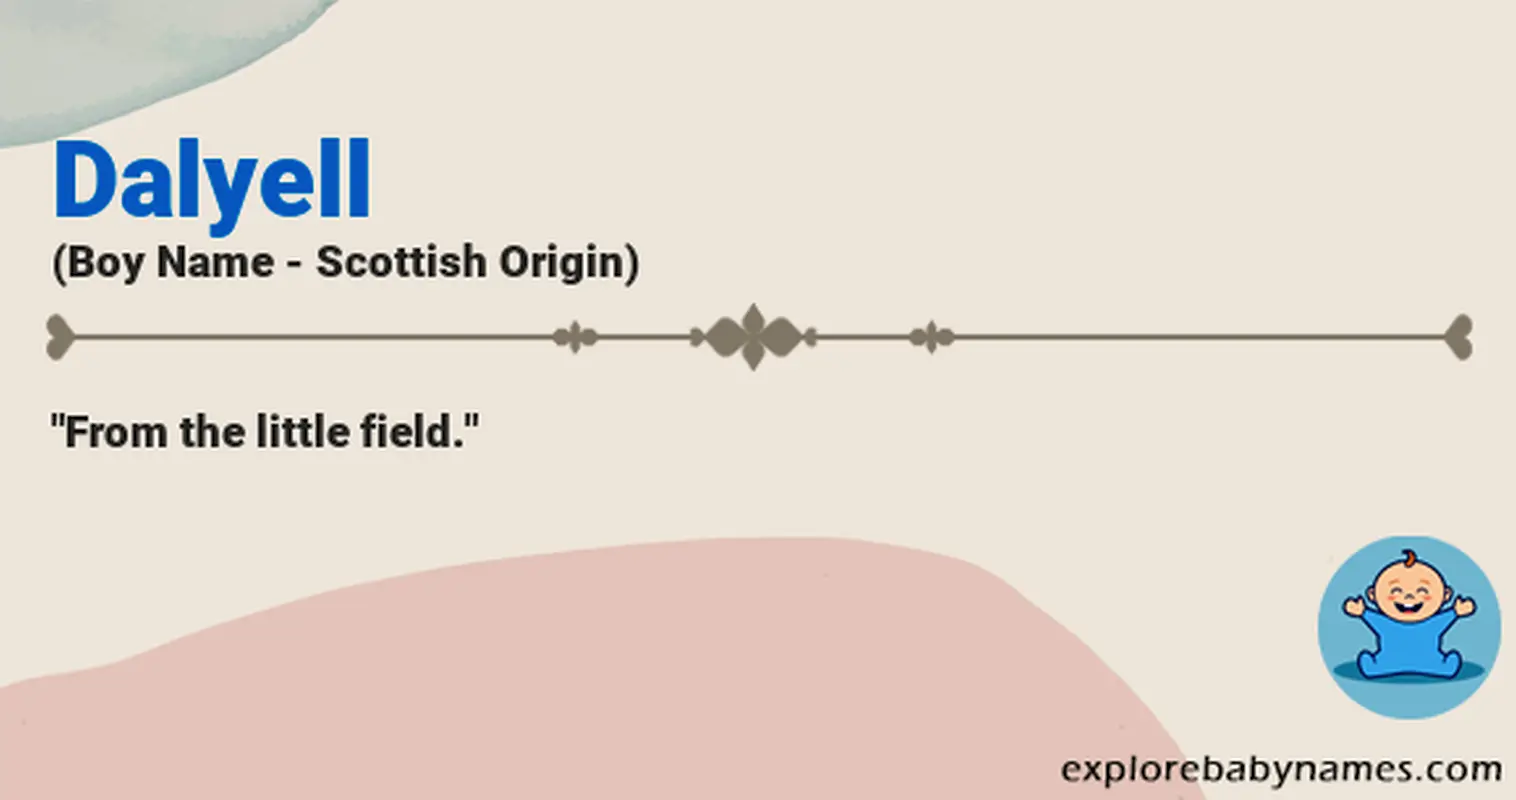 Meaning of Dalyell